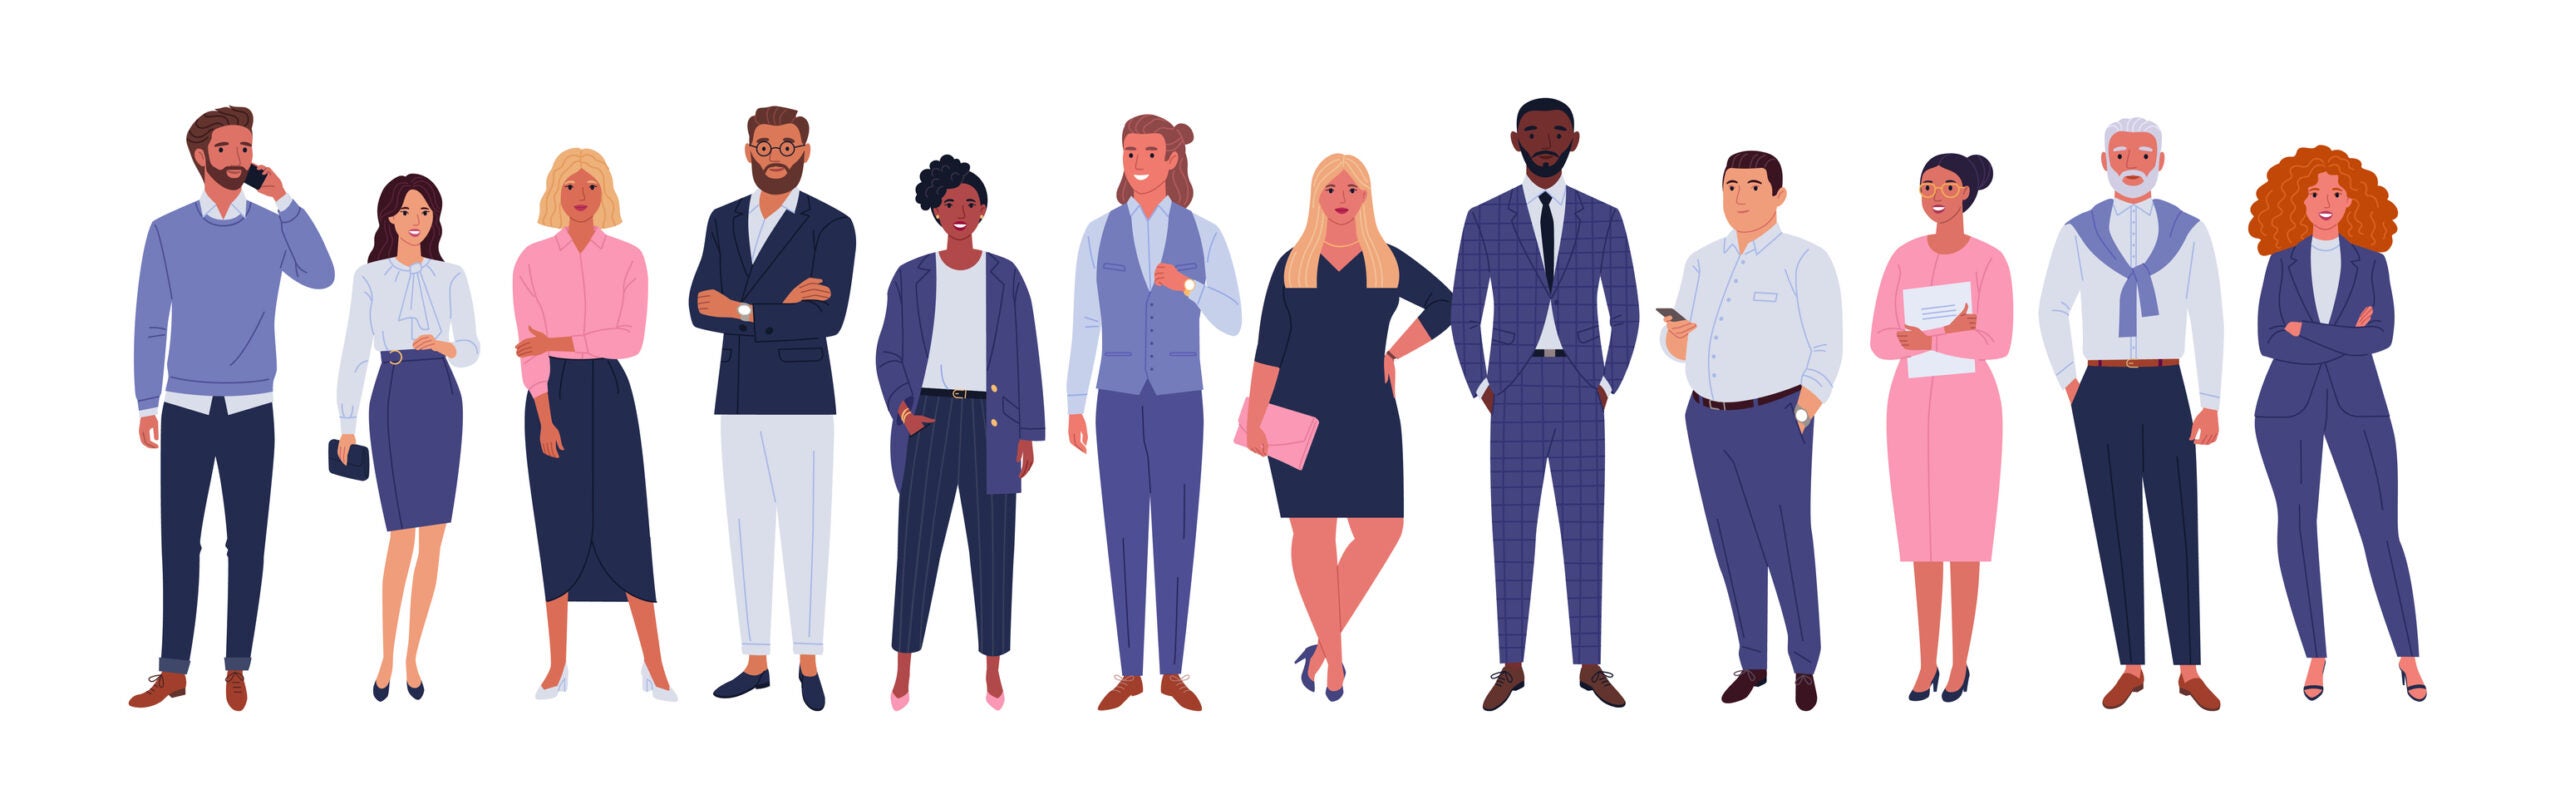 Vector illustration of diverse cartoon men and women of various races, ages and body type in office outfits. Isolated on white.